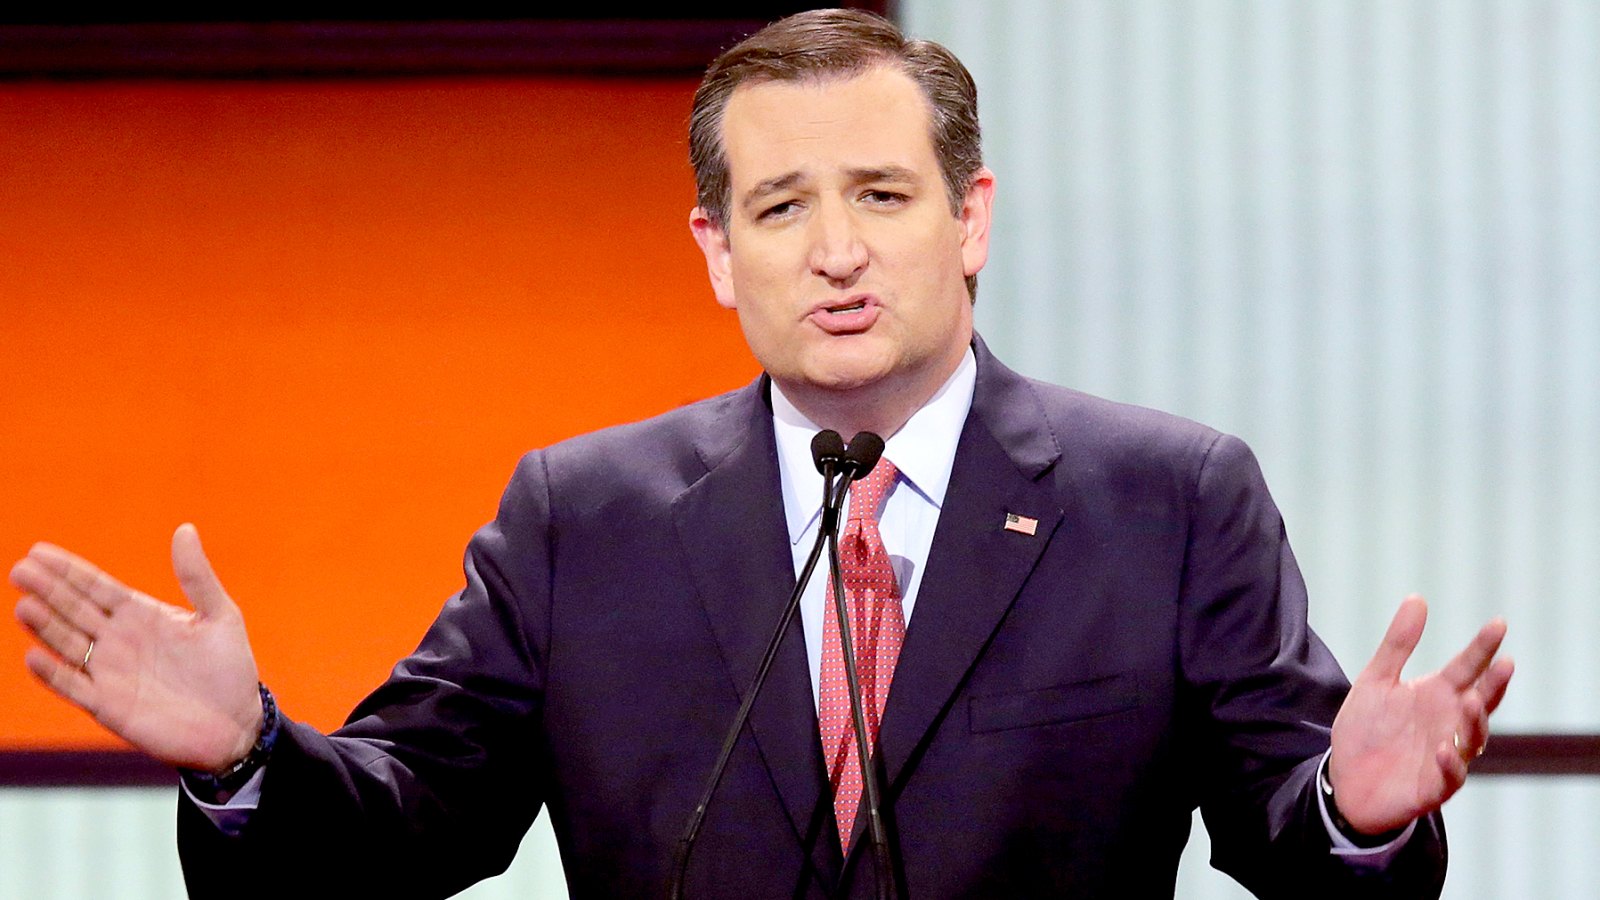 Republican presidential candidate Sen. Ted Cruz participates in a debate sponsored by Fox News at the Fox Theatre on March 3, 2016 in Detroit, Michigan.